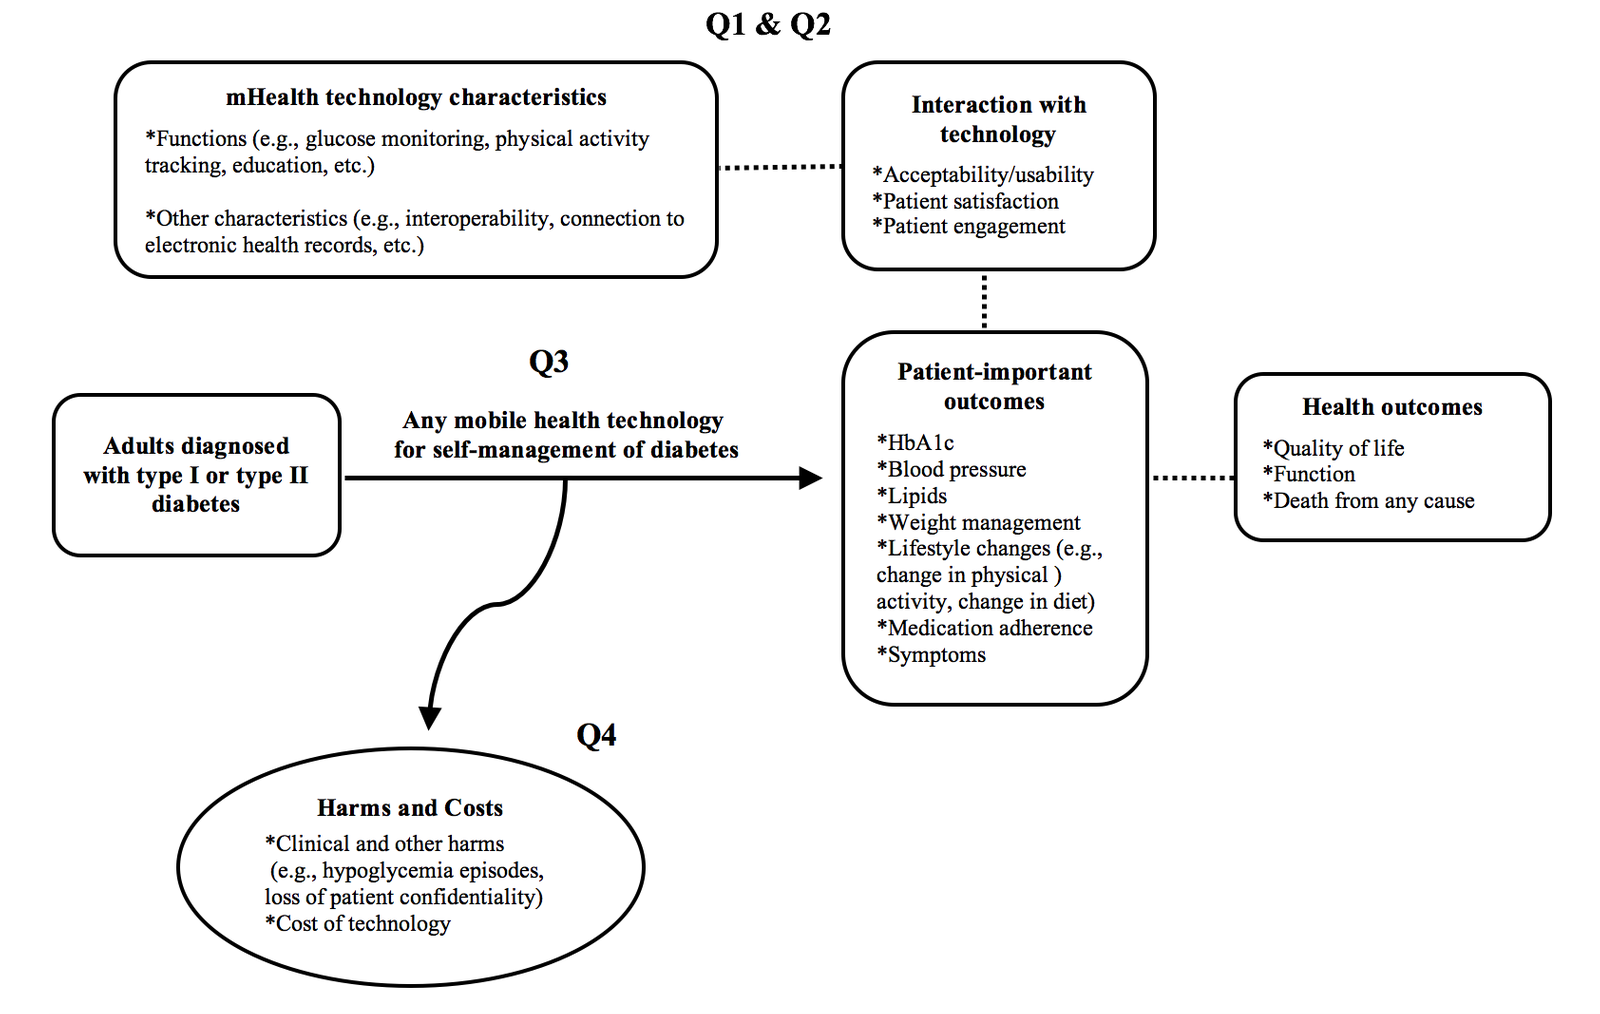 Figure 1 is the analytical framework. In the upper left-hand corner is a box that reads mHealth technology characteristics. Function (eg glucose monitoring, physical activity, tracking, education, etc) and other characteristics (eg interoperability, connection to electronic health record, etc). To the right of this box is a horizontal dotted line leading to another box that reads Interaction with technology; acceptability and usability, patient satisfaction, and patient engagement. Between the two boxes, above the horizontal dotted line, is the label Questions 1 and 2. On the bottom of the second box, there is a vertical dotted line leading to a third box in the lower right-hand corner, which reads Patient important outcomes; HbA1c, blood pressure, lipids, weight management, lifestyle changes (eg change in physical activity, change in diet), medication adherence, and symptoms). This box has a dotted line extending from its right side to another box which reads Health outcomes; quality of life, function, and death from any cause. On the left side of the screen toward the middle, there is a box that reads Adults diagnosed with type 1 or type 2 diabetes. From the box's right-hand side extends solid horizontal line with an arrow pointing to the right, toward the aforementioned box titled patient-important outcomes, with the words Question 3, any mobile health technology for self-management of diabetes over the line. A curved vertical arrow extending from the solid horizontal down toward a circle contains the words Harms and costs; clinical other harms (eg hypoglycemia episodes, loss of patient confidentiality), and cost of technology. This line is labeled Question 4.